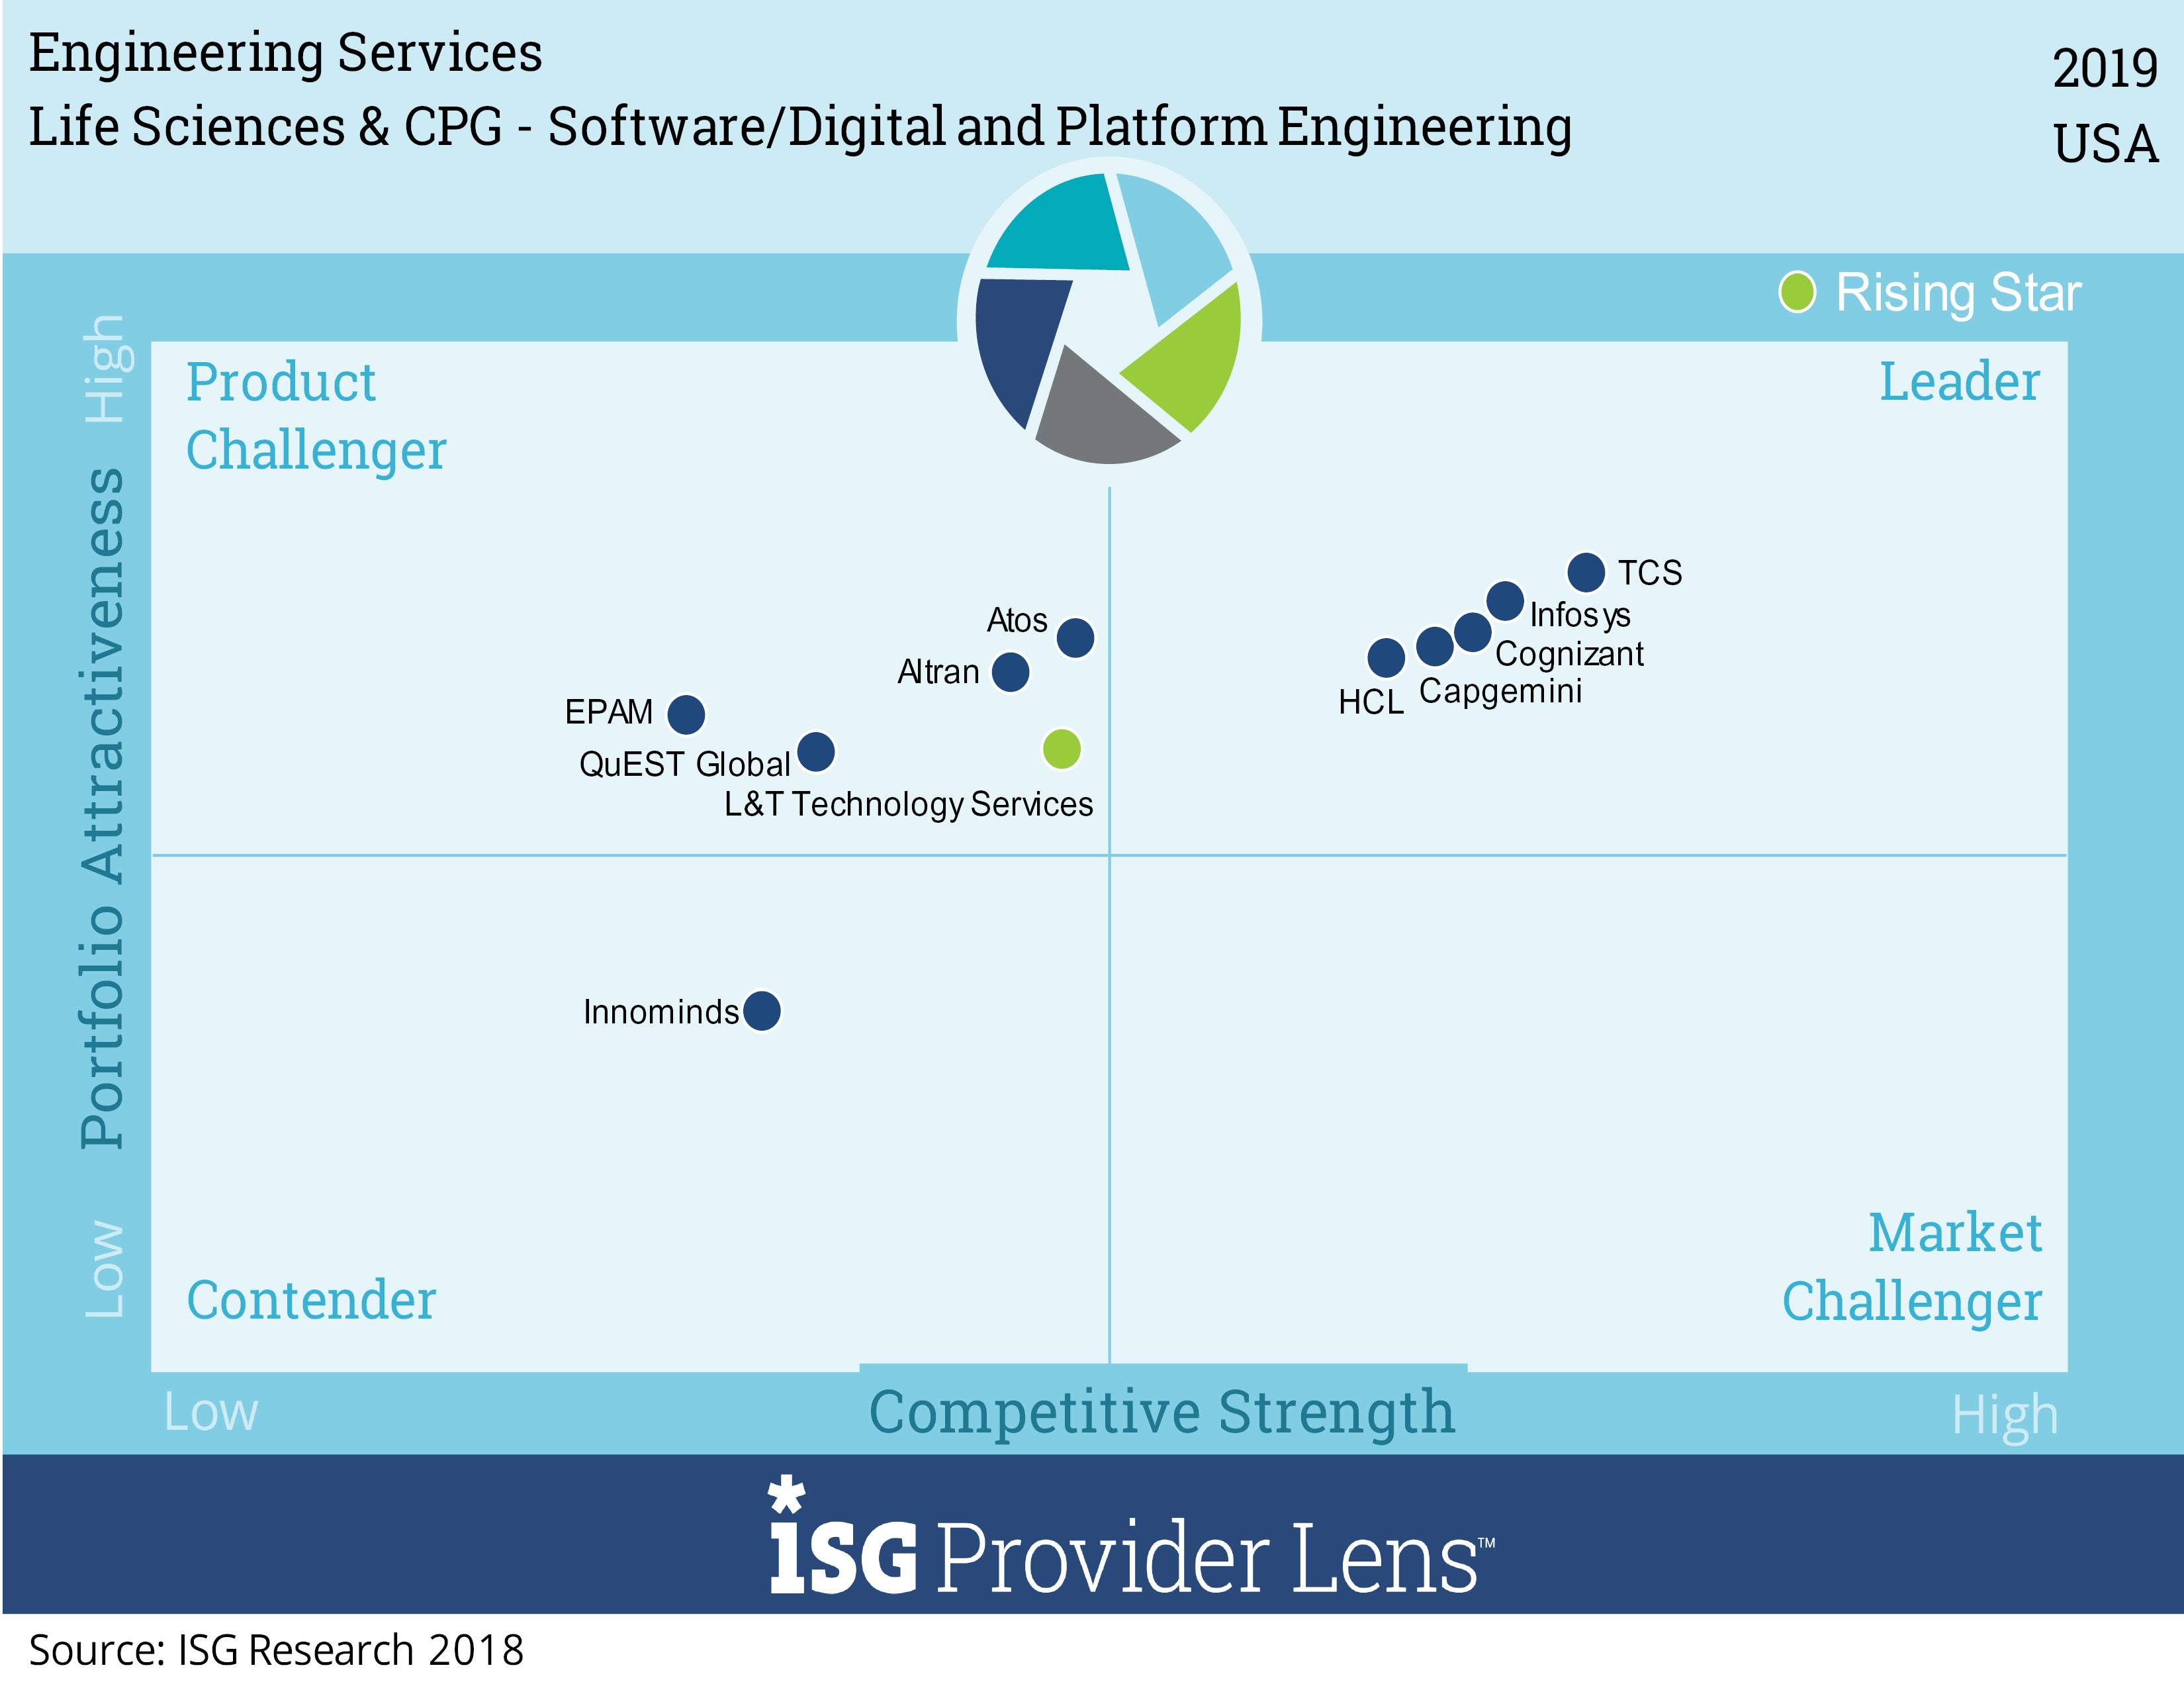 Software, digital and platform engineering services consist of software product development and all related application software development, independent of specific hardware. It also includes IoT software applications for connectivity, mobility, predictive maintenance, OT data analytics (OT data defined as data being generated from the plant floor and production processes associated with production machines, sensors, control systems, etc.), digital supply chain and related areas, and engineering platform-related software work, such as IoT, PLM, MES and other industrial systems. ERP platforms are out of scope.